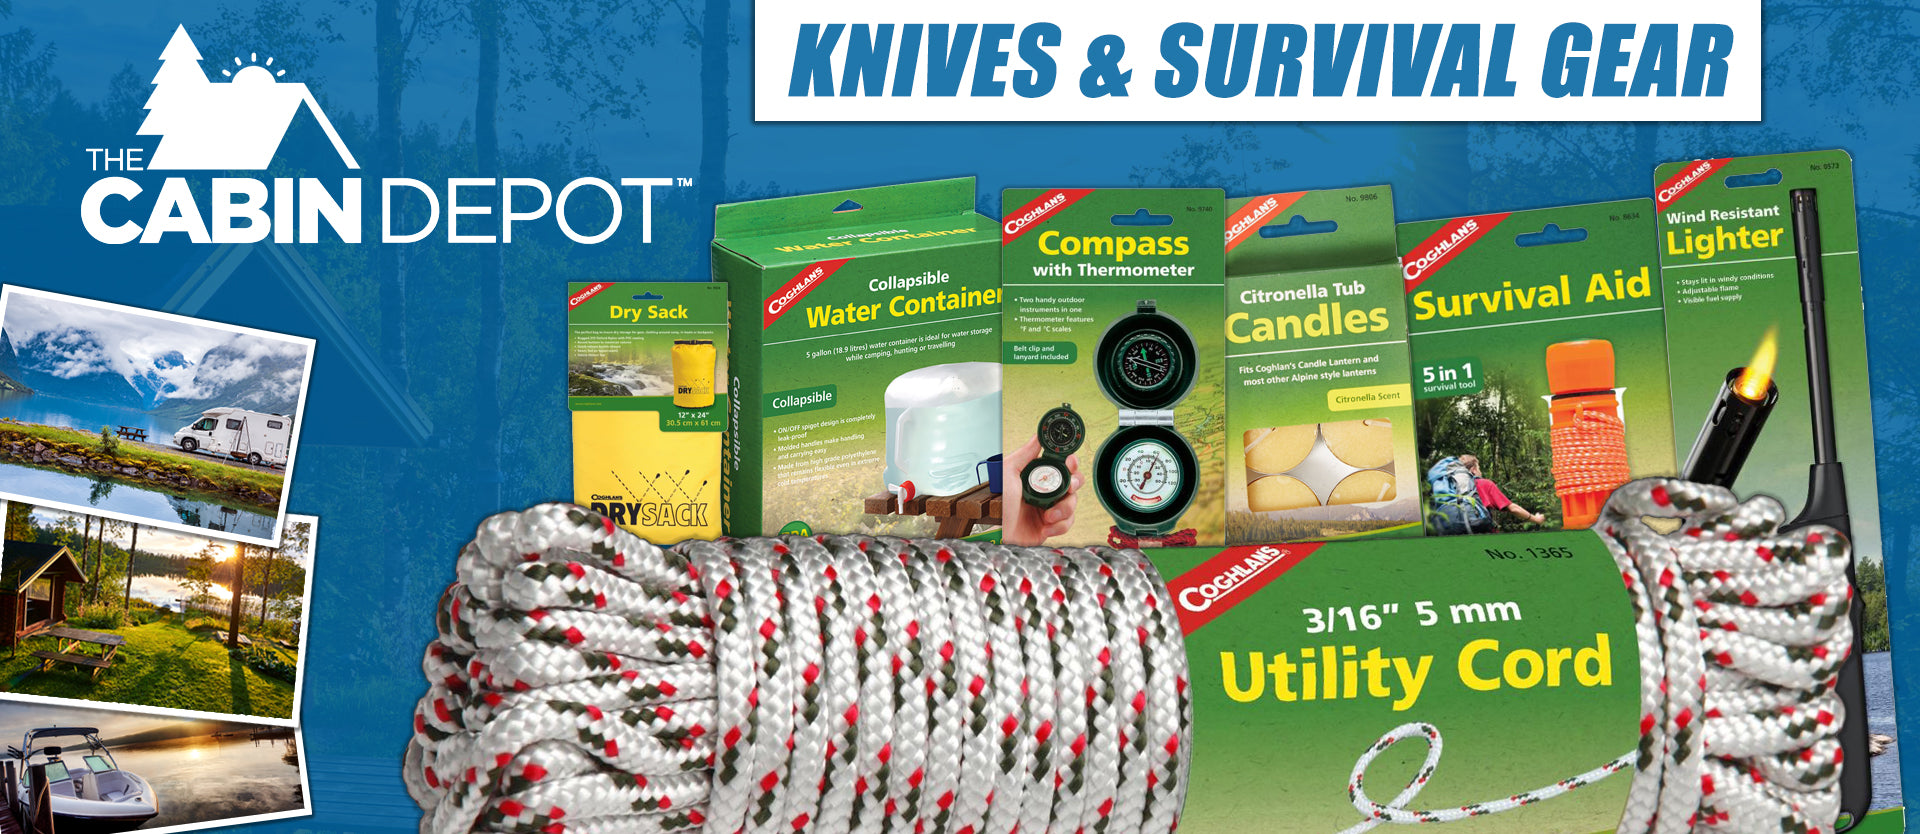 Knives Survival Gear Camping Off Grid The Cabin Depot ™ Canada